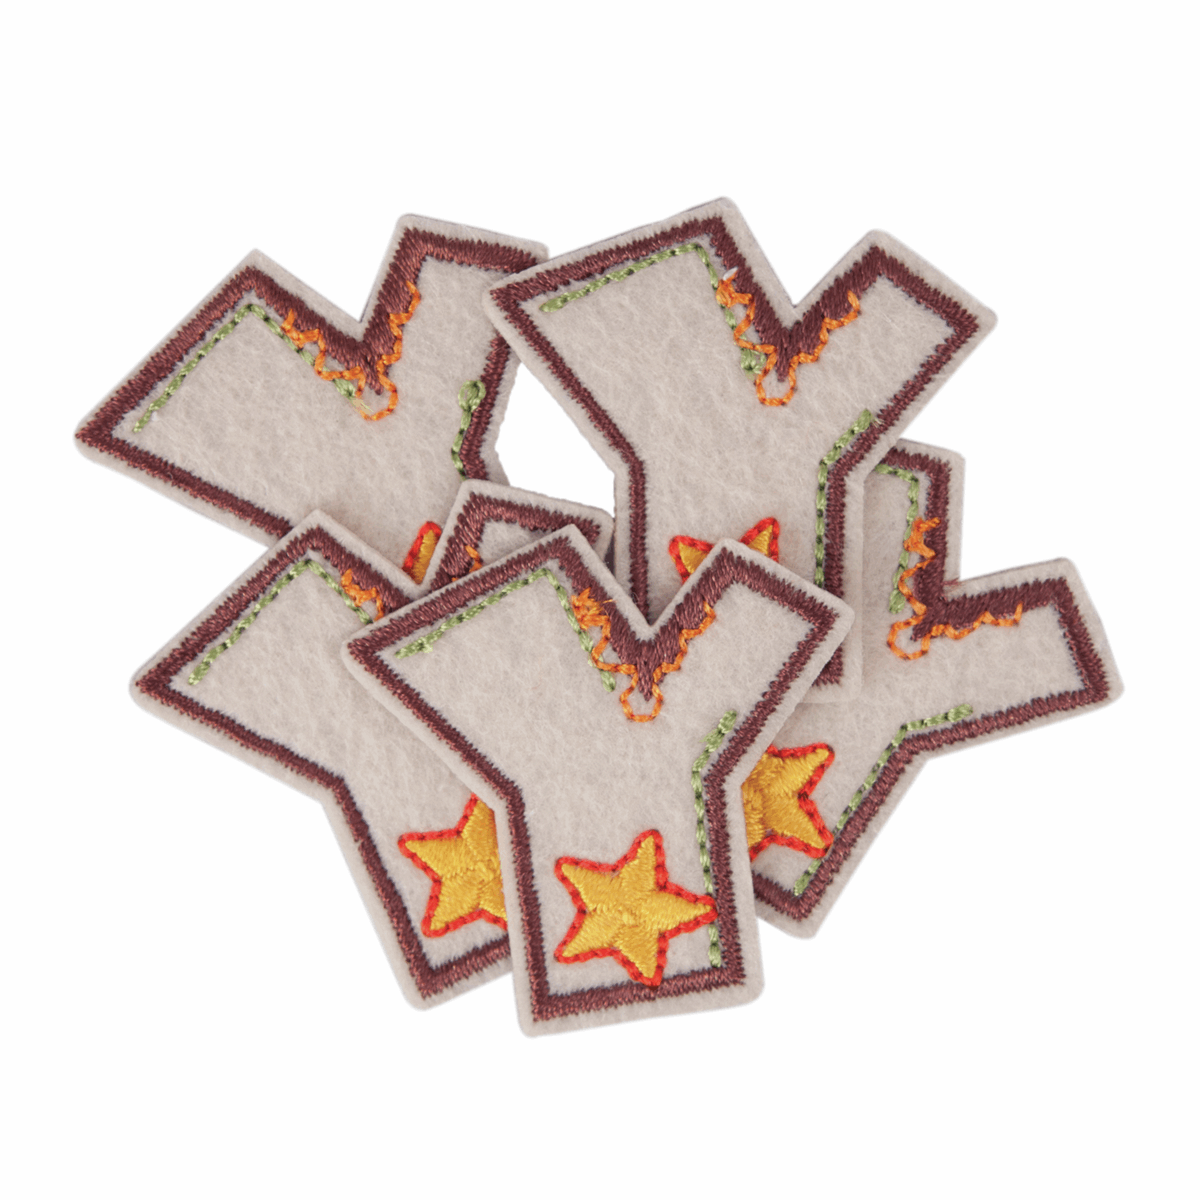 Iron-On/Sew On Alphabet Motif Patch - Letter Y